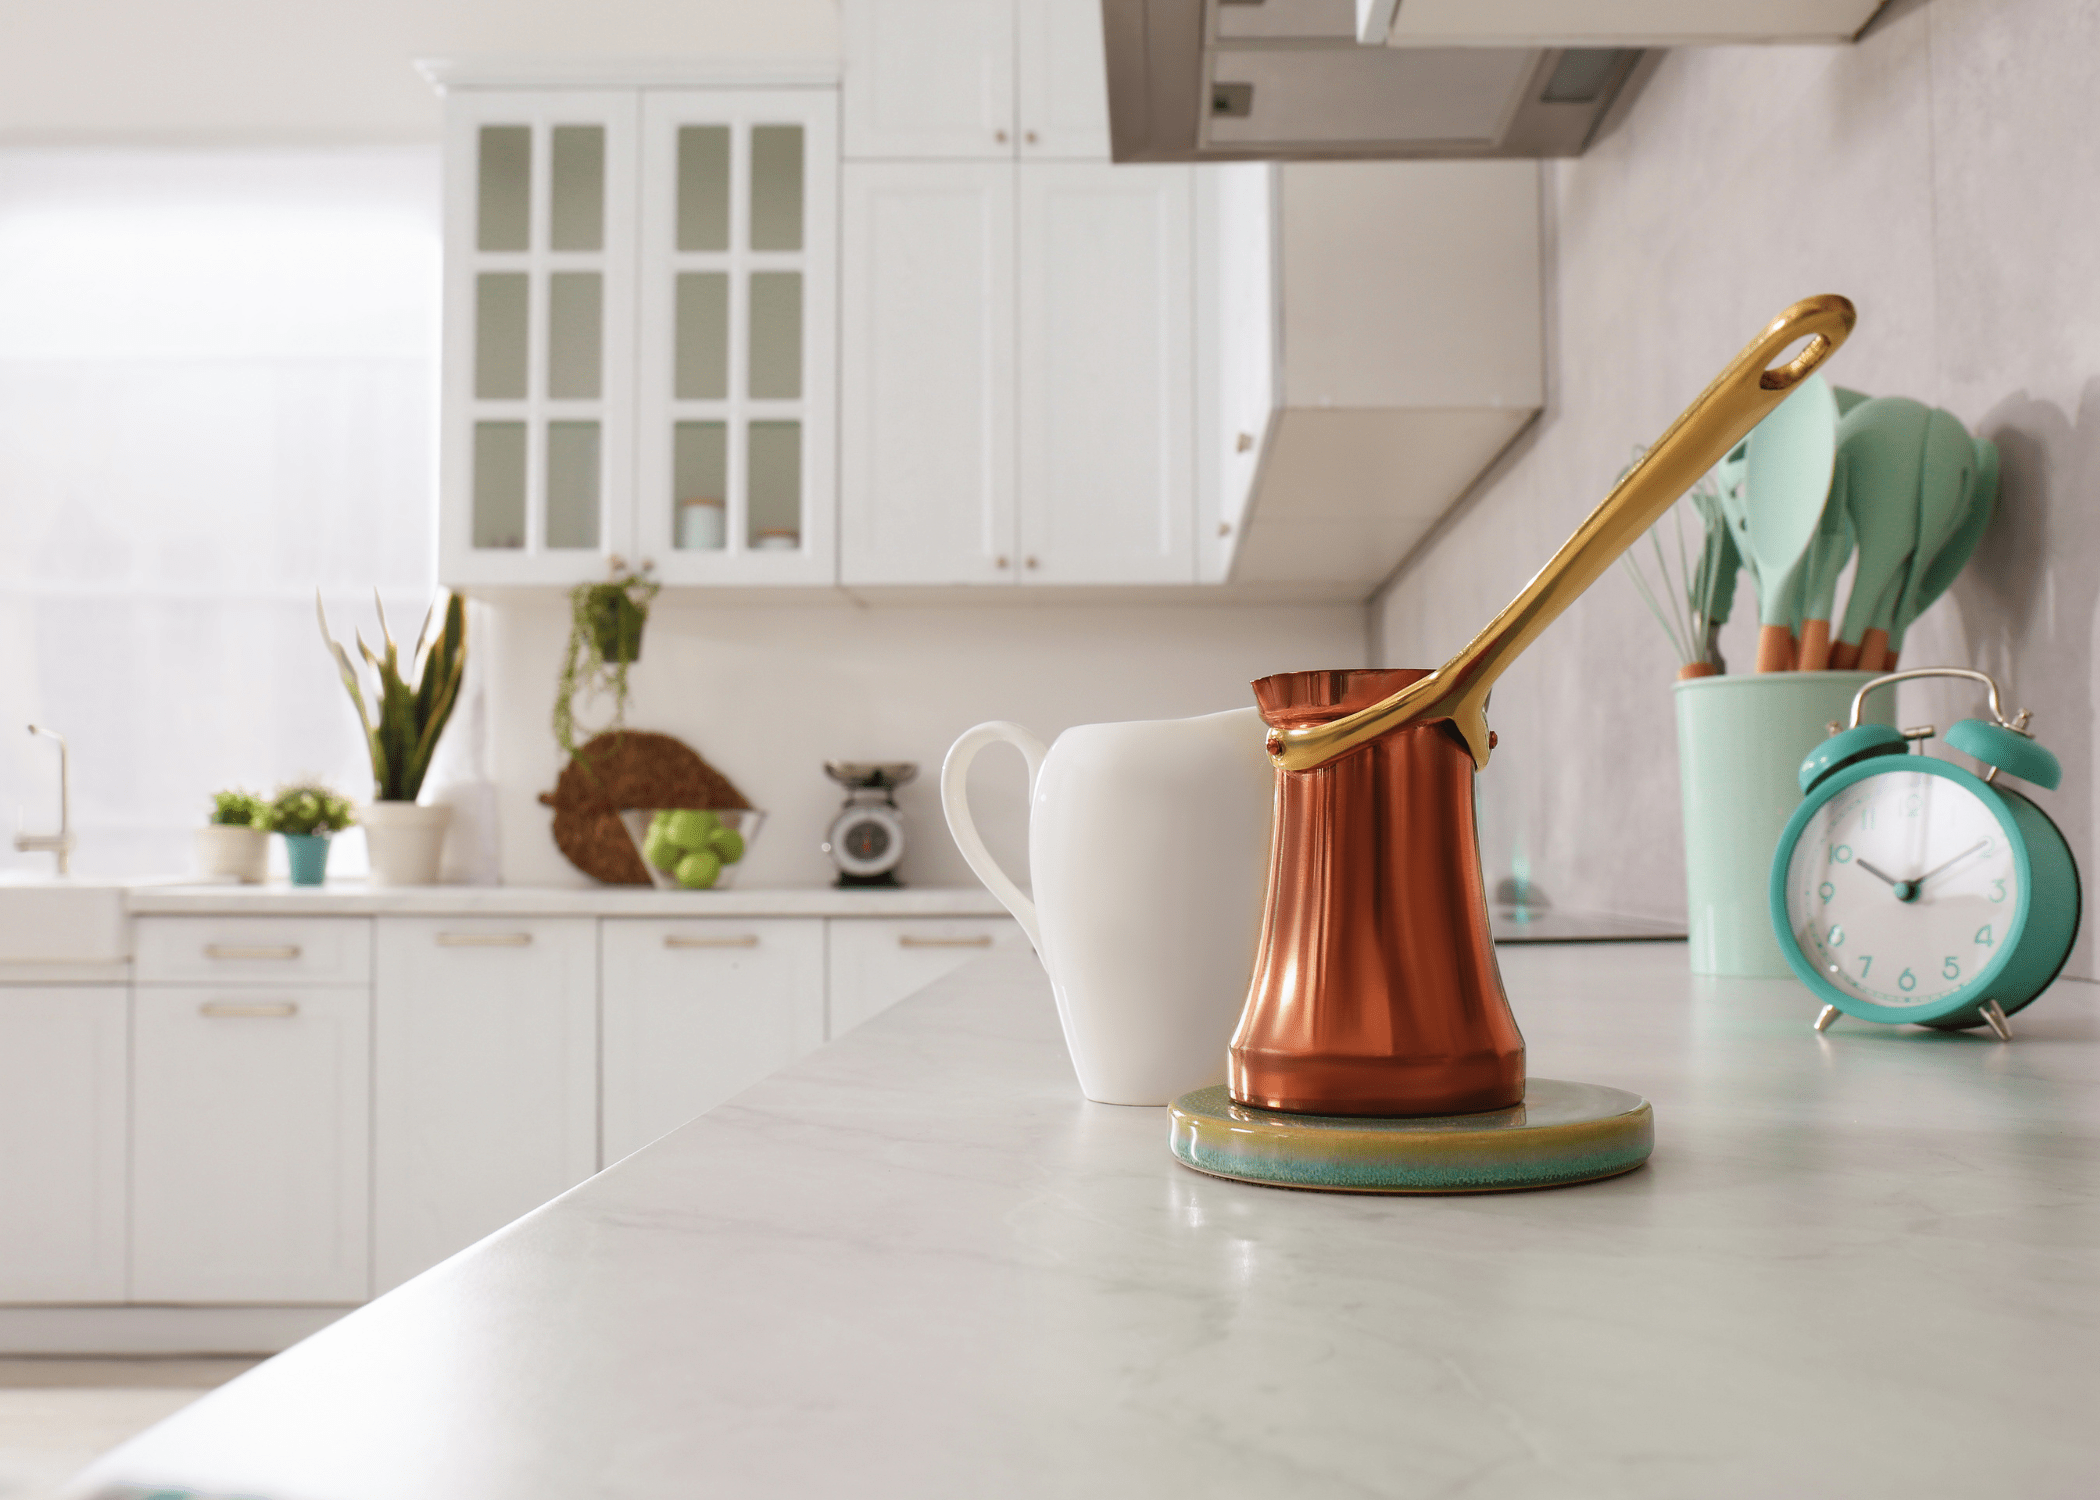 close up of laminate counters in white kitchen with copper pot and white creamer sea foam green utensils